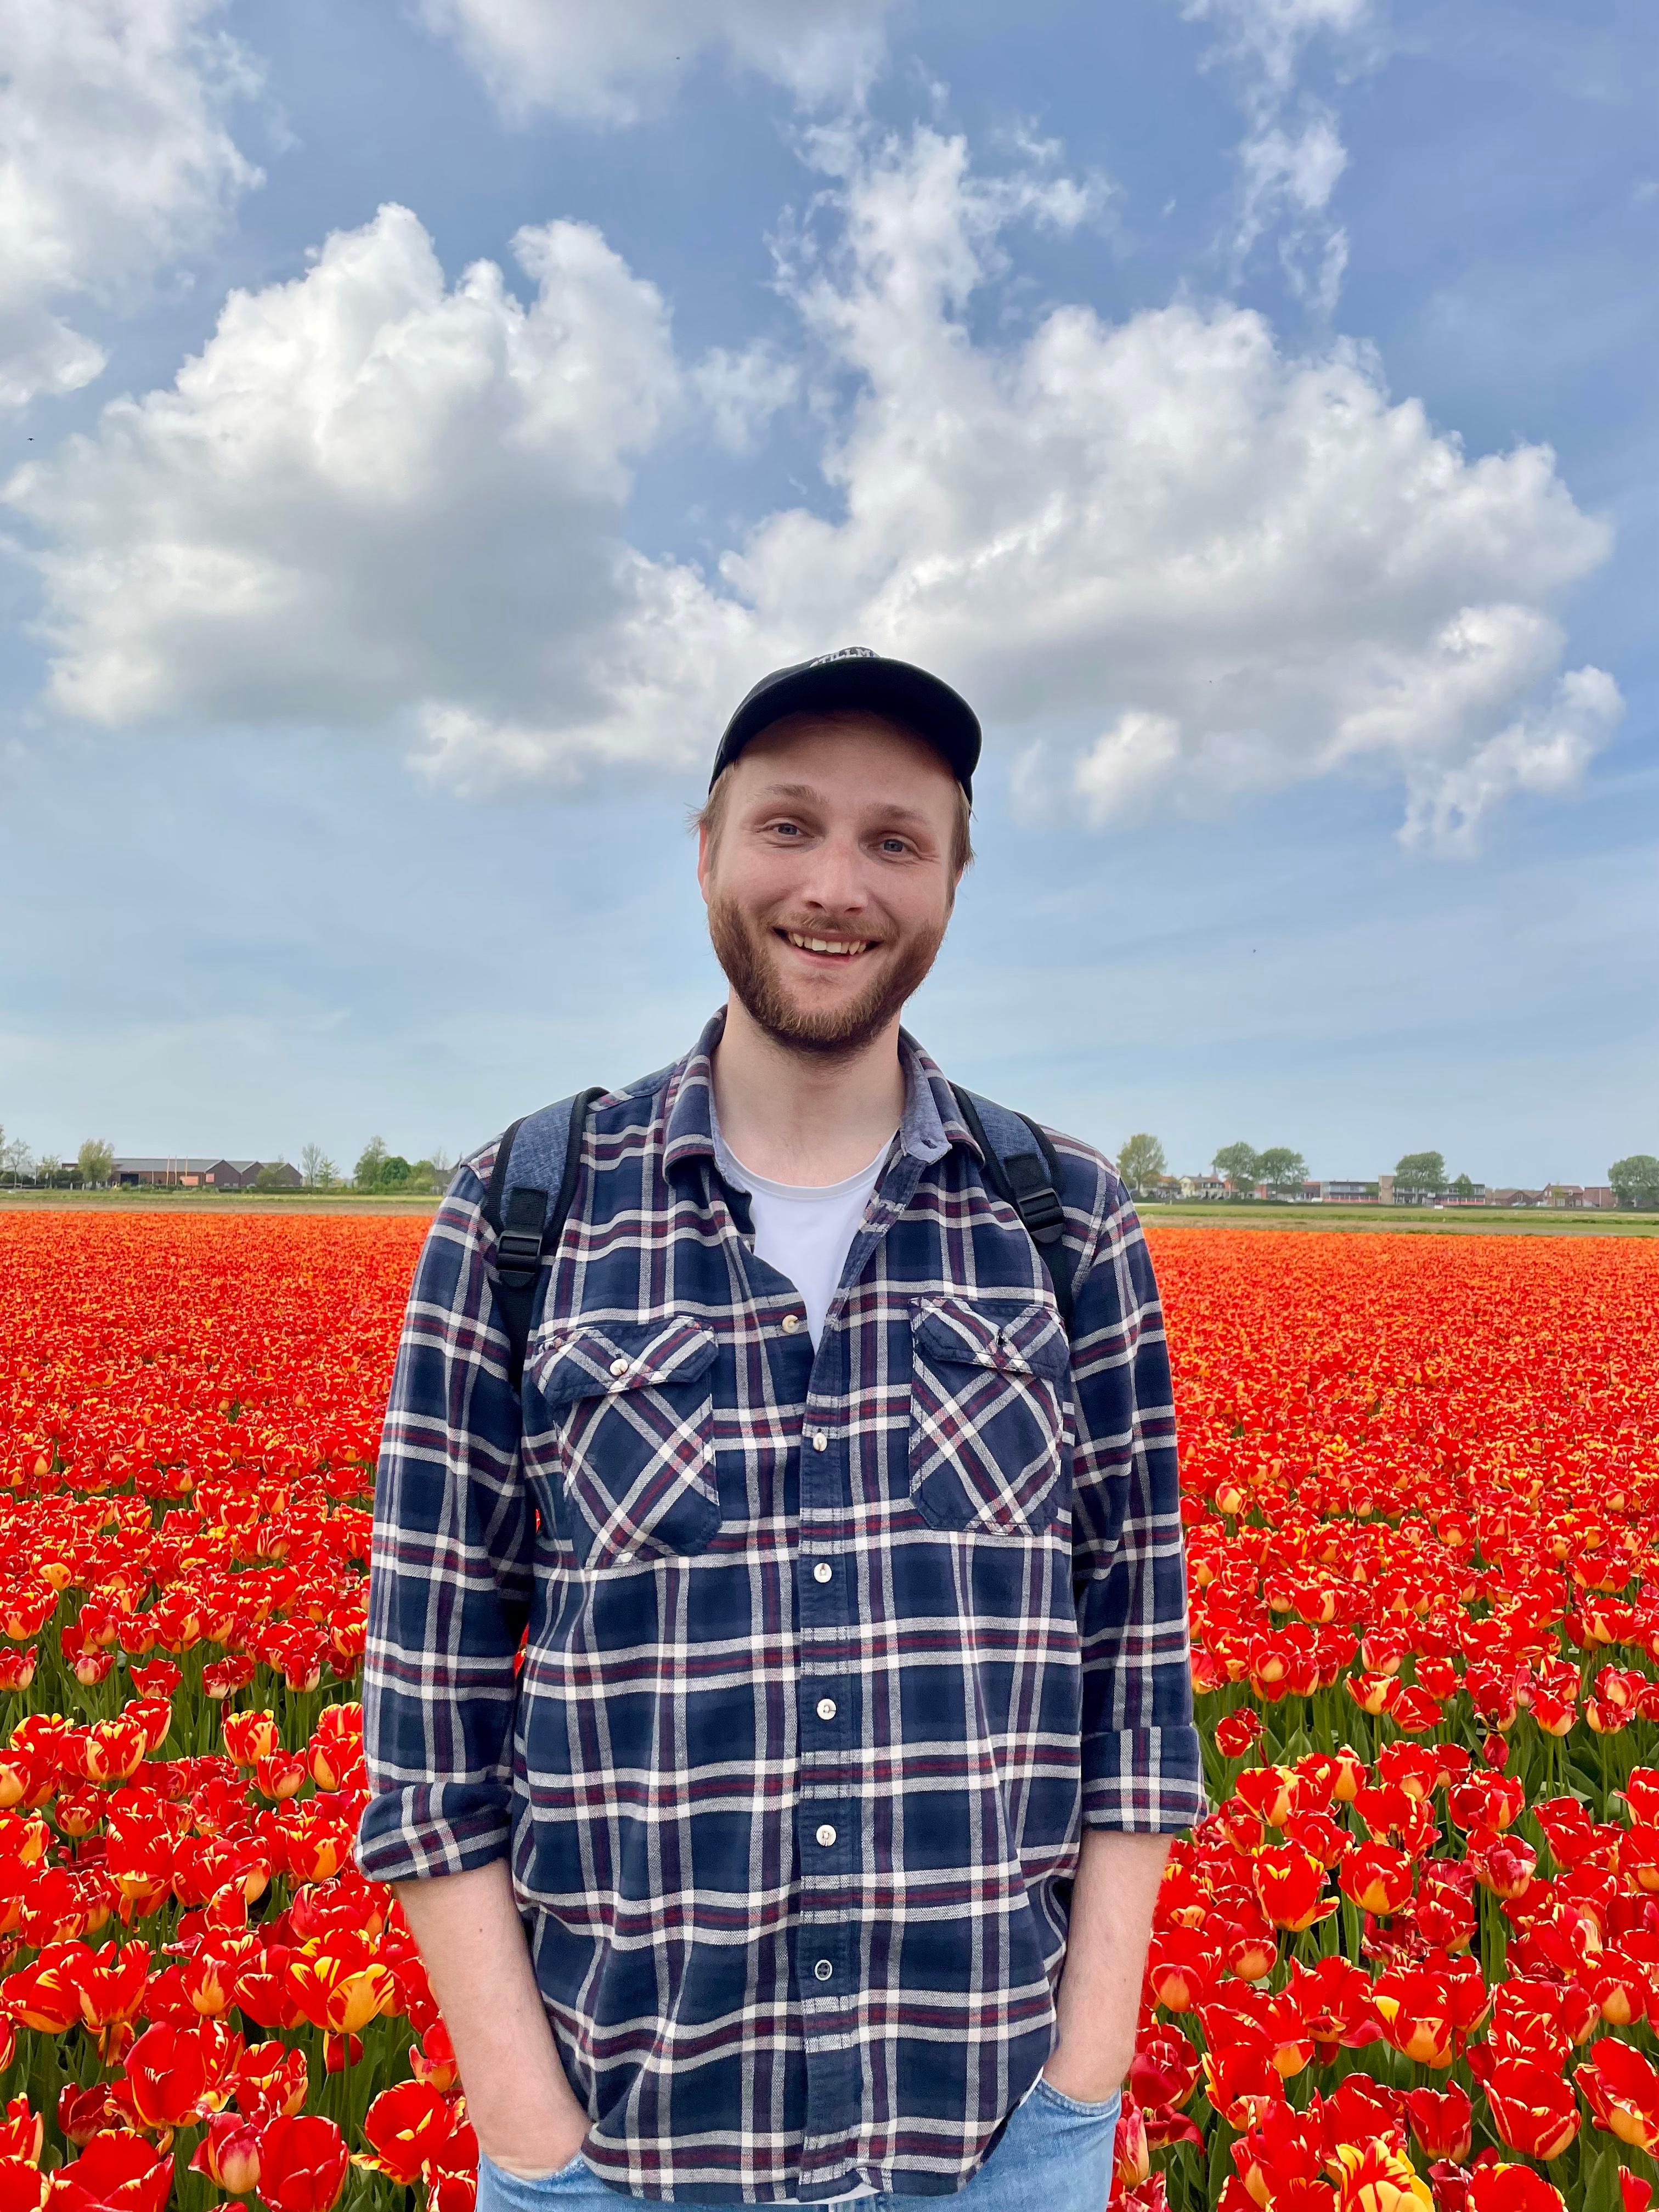 Patrick wearing blue shirt and a hat in front of a field of red tulips